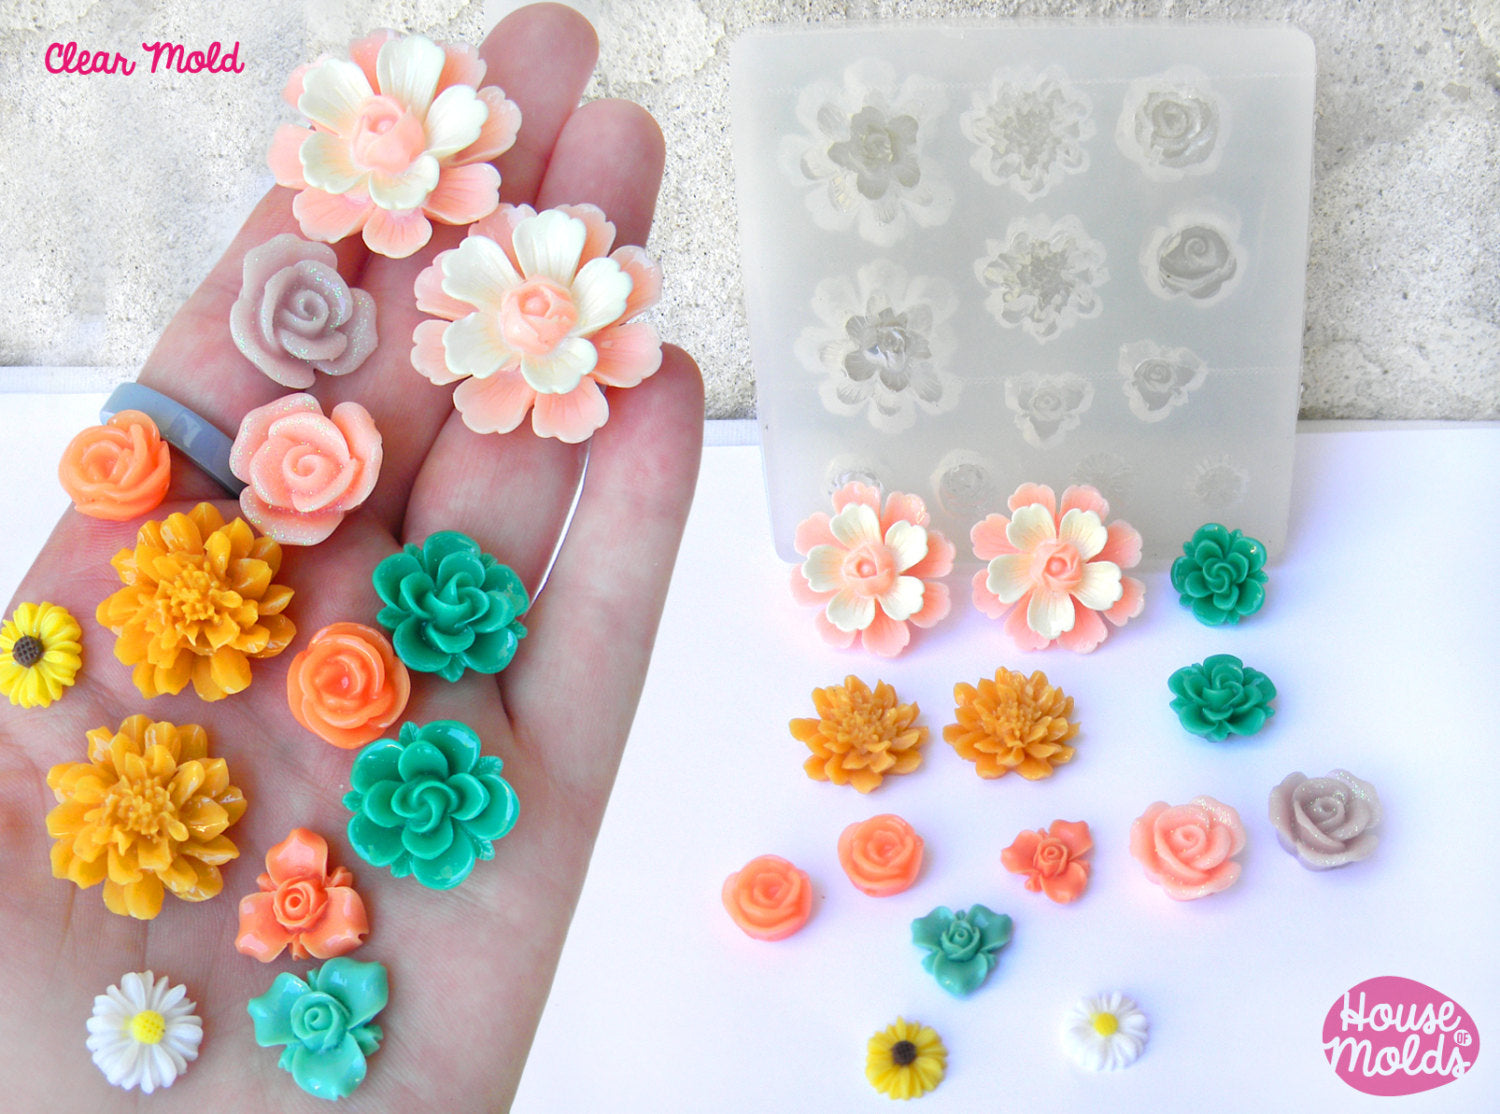 14 Flowers Clear Mold ,7 flowers styles,silicone Mold to make